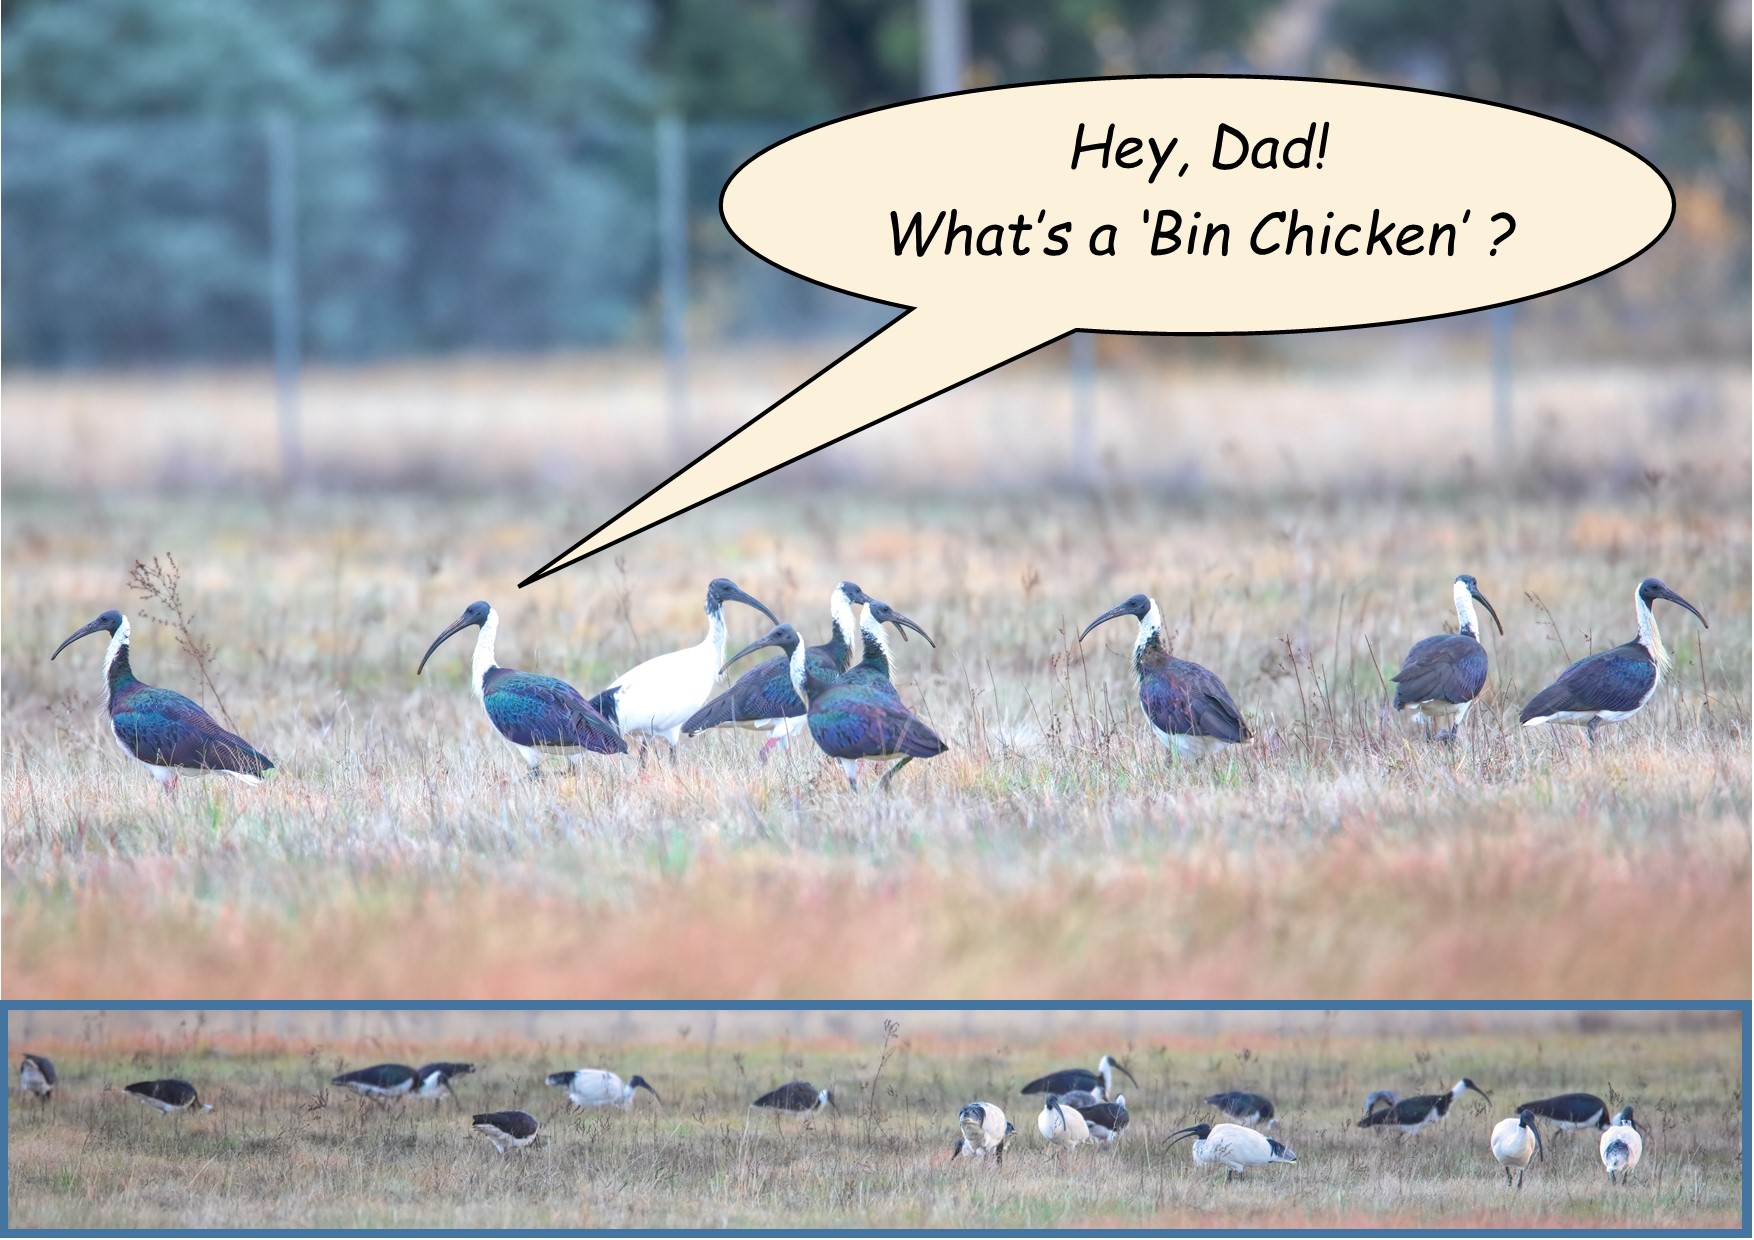 A group of birds in a field

Description automatically generated